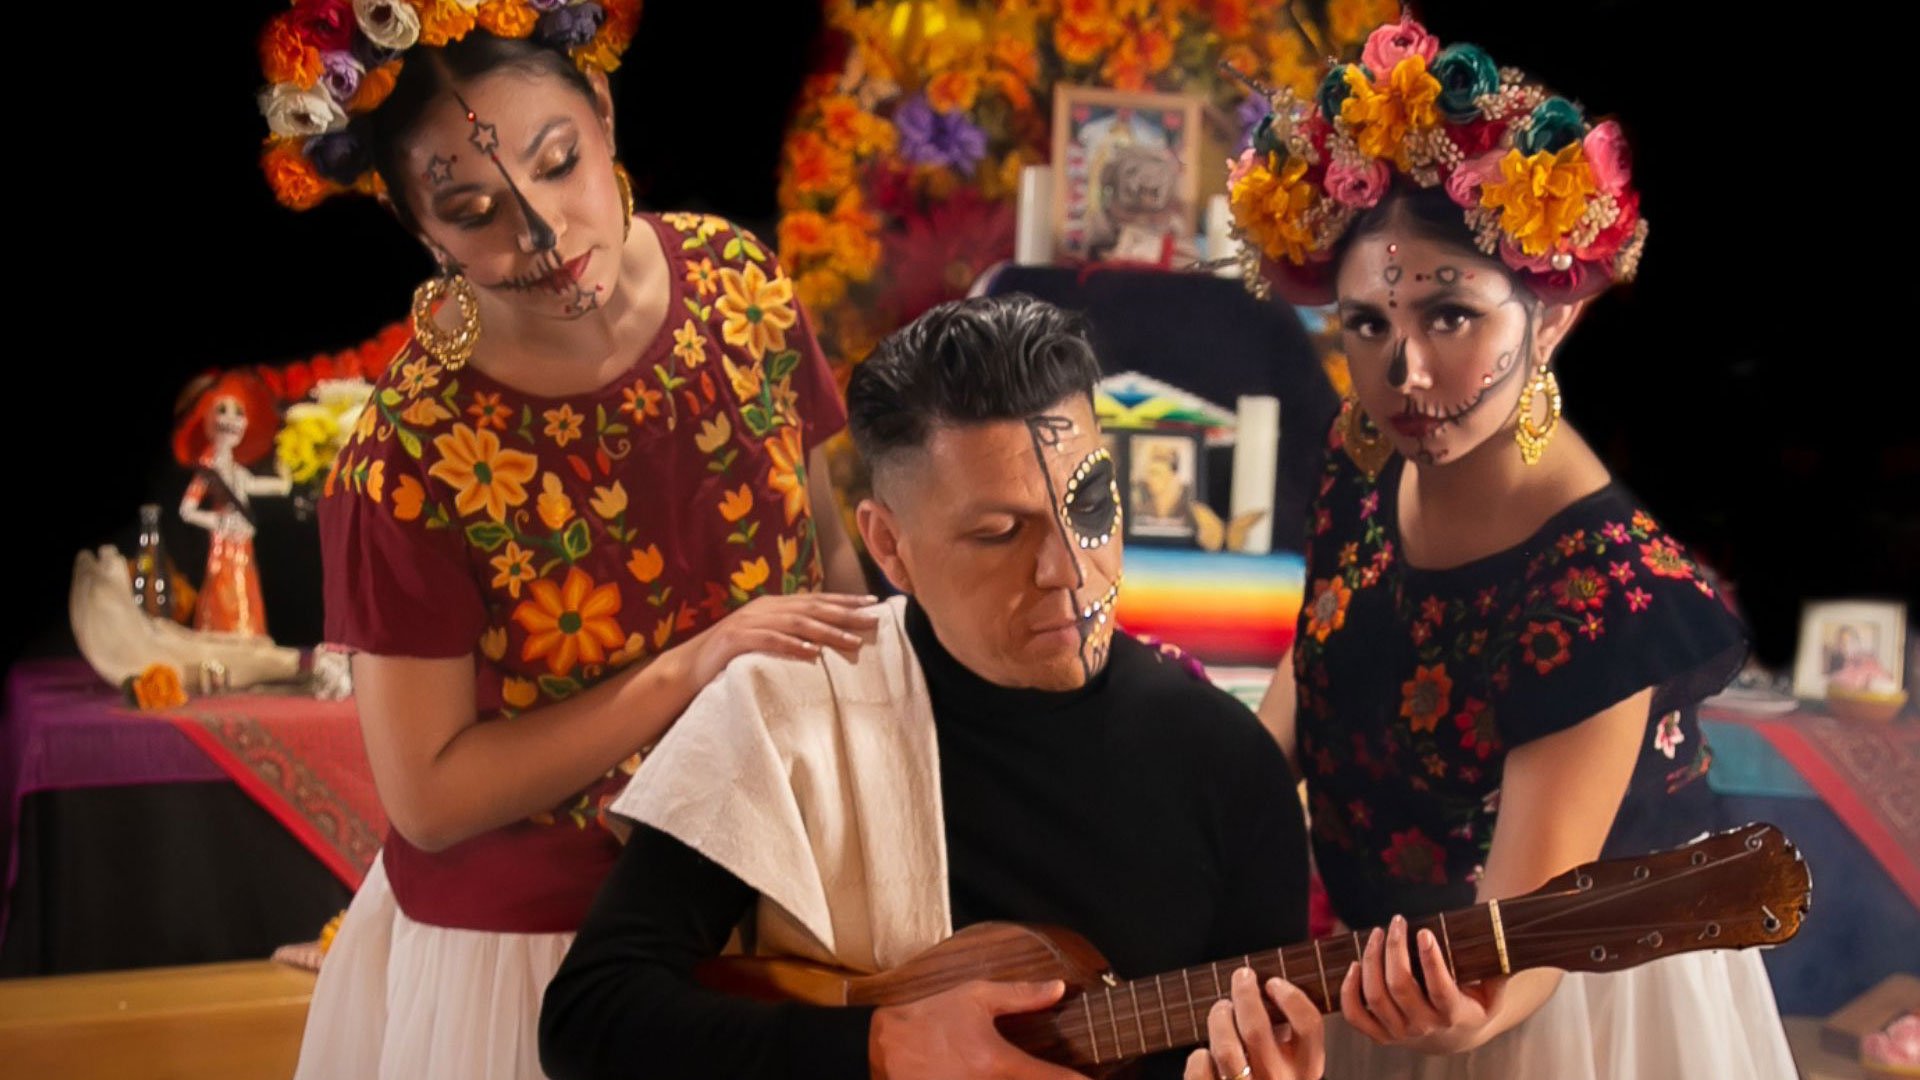 Las Cafeteras presents Hasta La Muerte: A Day of the Dead Musical Experience